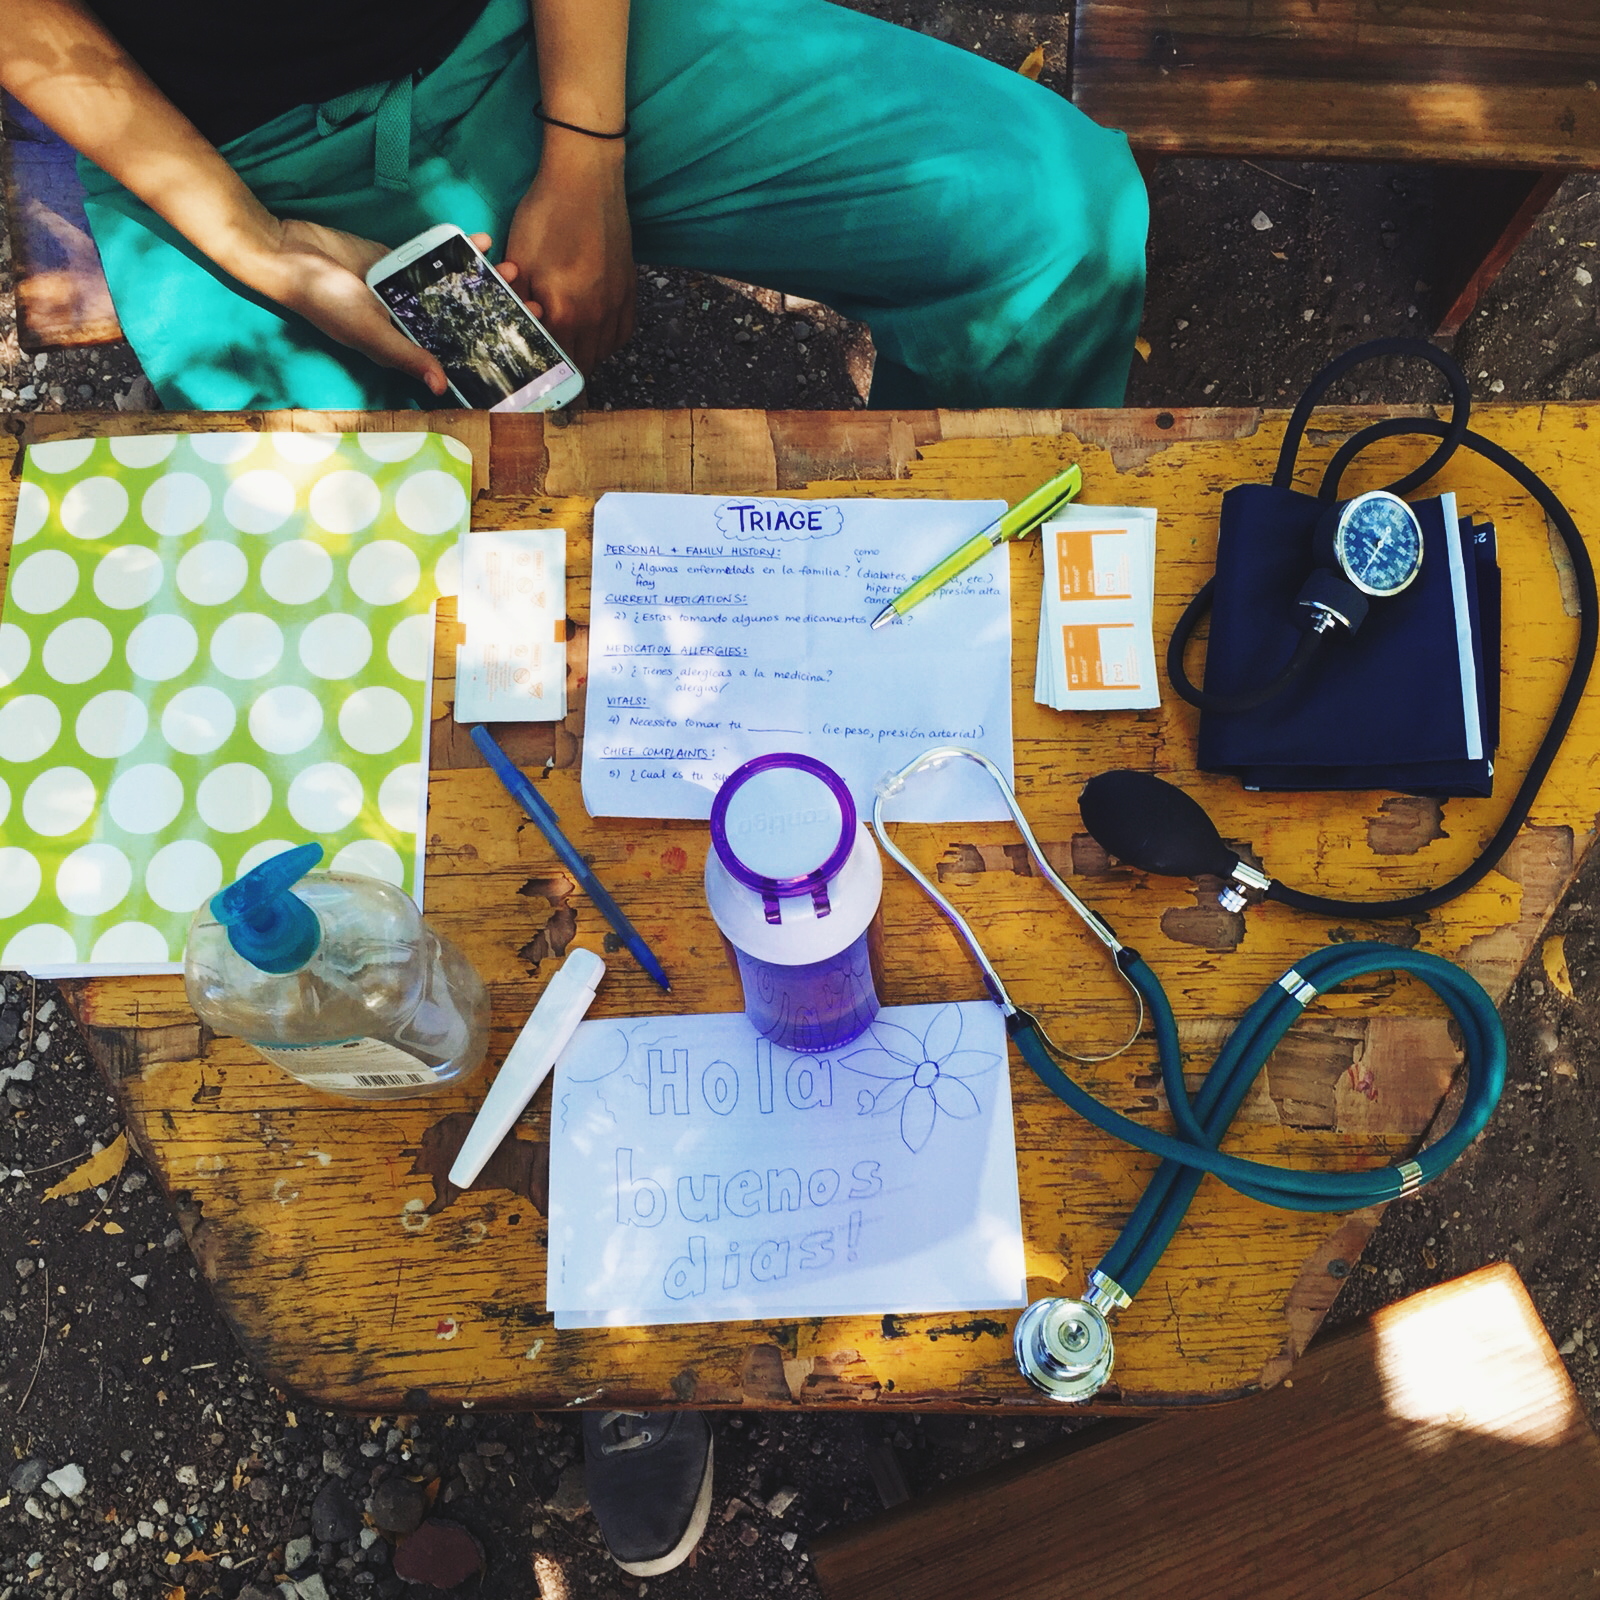 Our triage table is a tiny little yellow wooden table. On it lies hand sanitizer, a blood pressure cuff, a stethoscope, alcohol swabs, water bottles, pens, and a folder where we hold our forms and translation booklets.